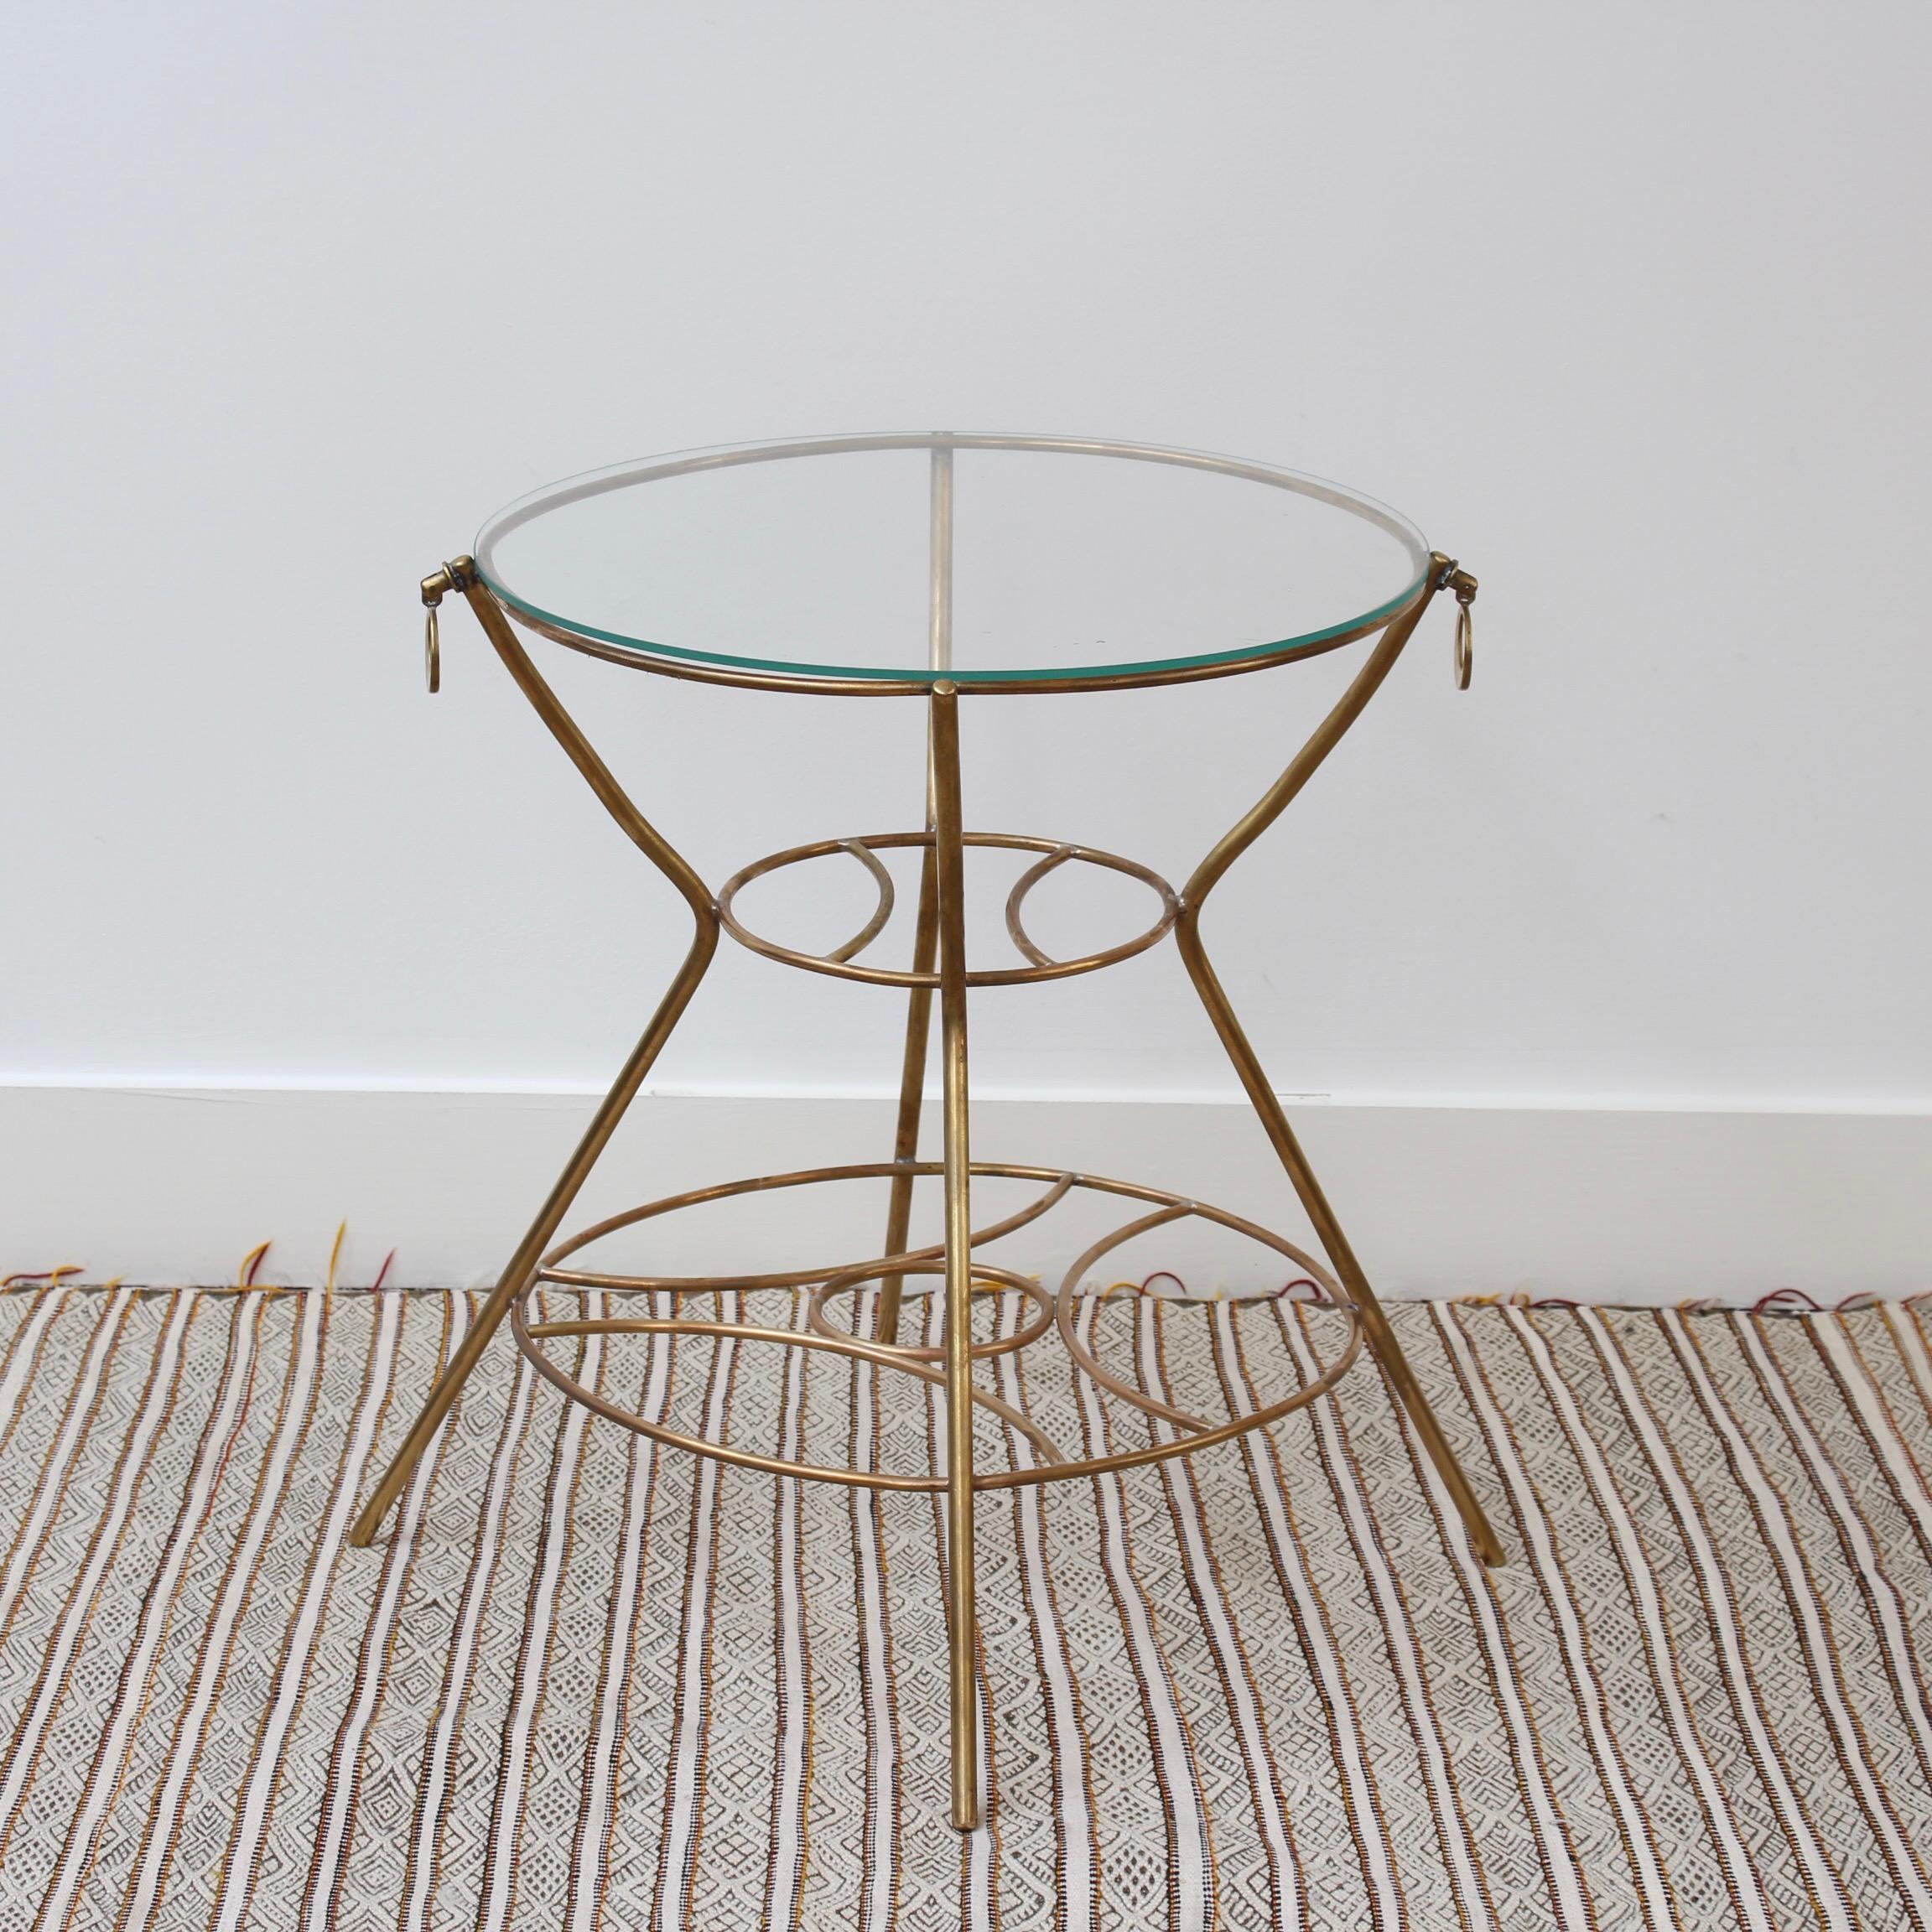 Vintage Italian side table (circa 1960s). Immensely stylish in the modern Italian way, this seductive side table exudes balance, precision and strength. Consisting of three central circles - two in brass and one in glass - the table is supported by